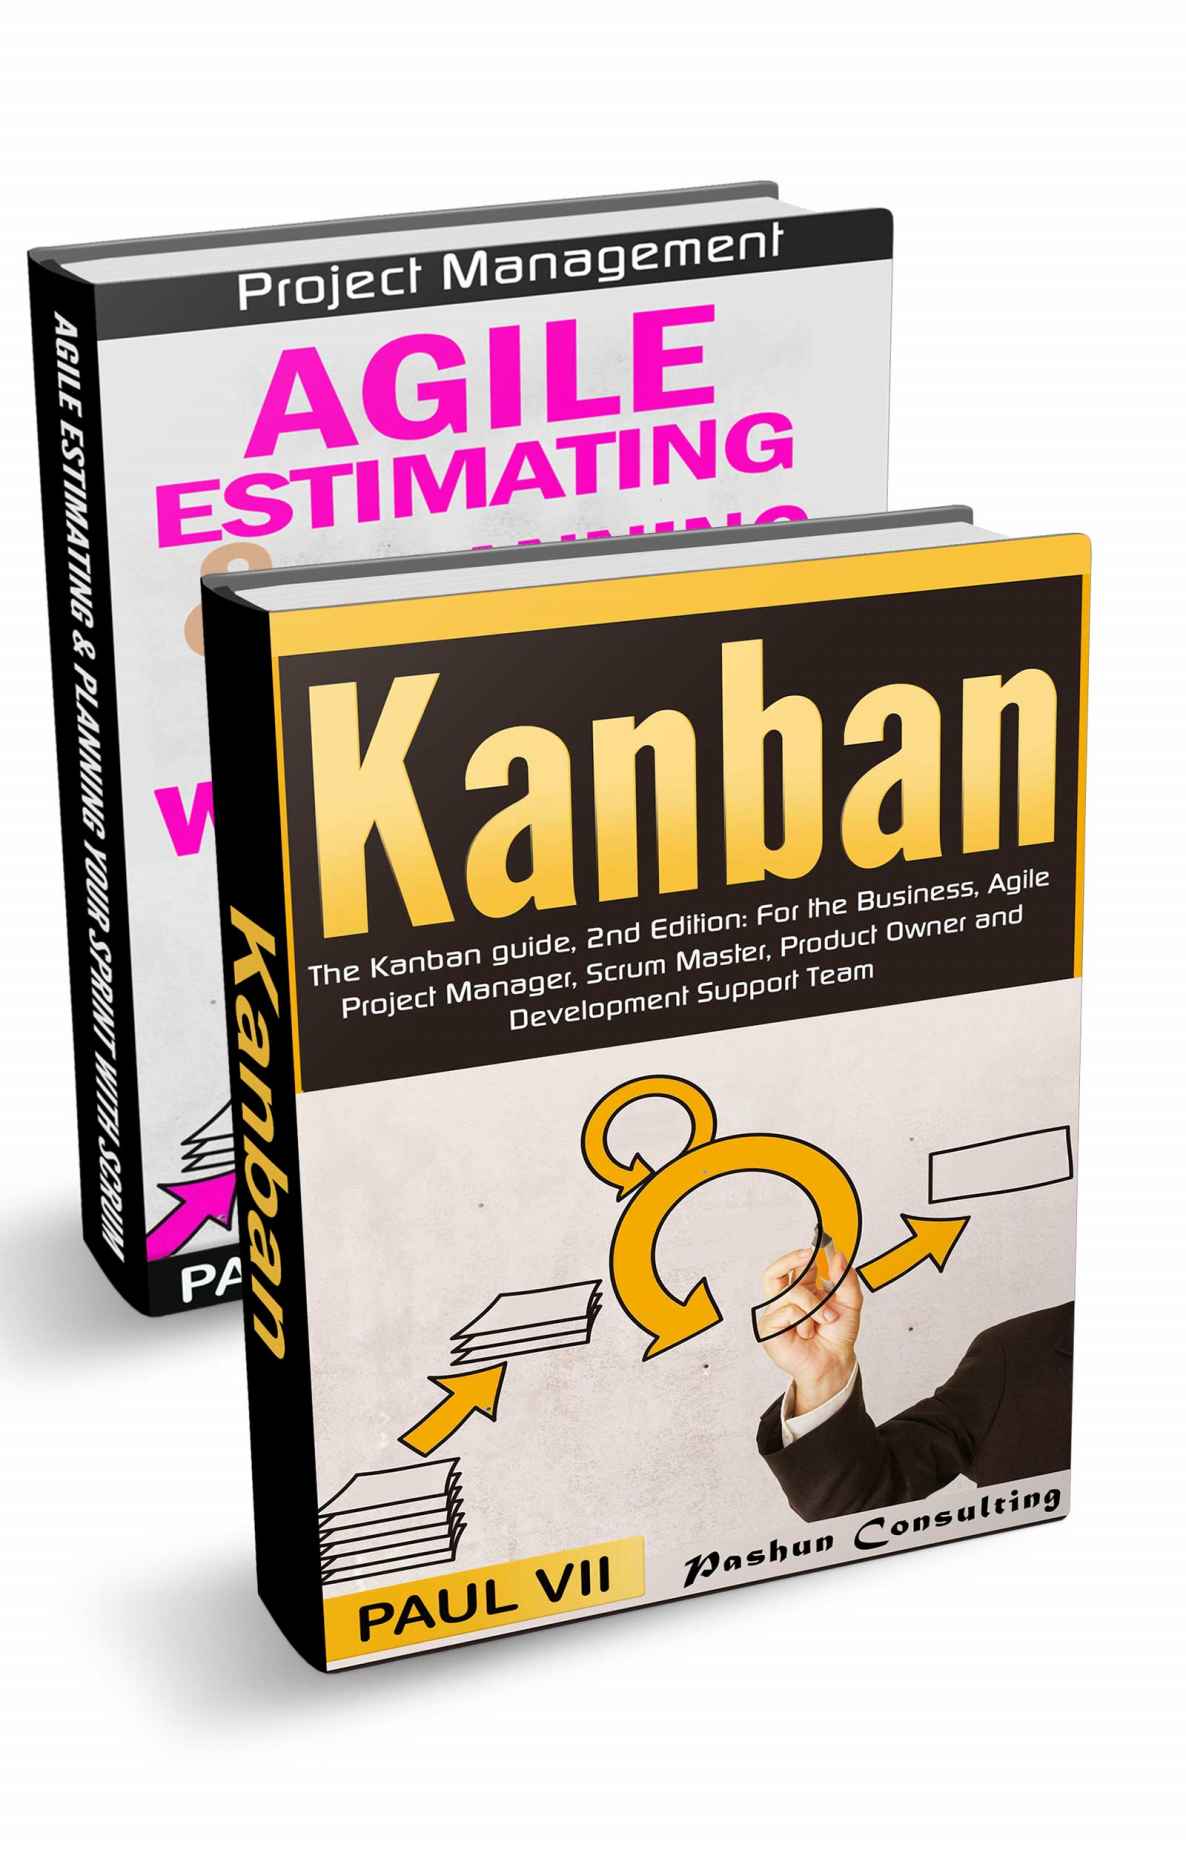 Agile Product Management: (Box Set) : Agile Estimating & Planning Your Sprint with Scrum & Kanban: The Kanban guide, 2nd Edition (scrum, scrum master, agile development, agile software development)